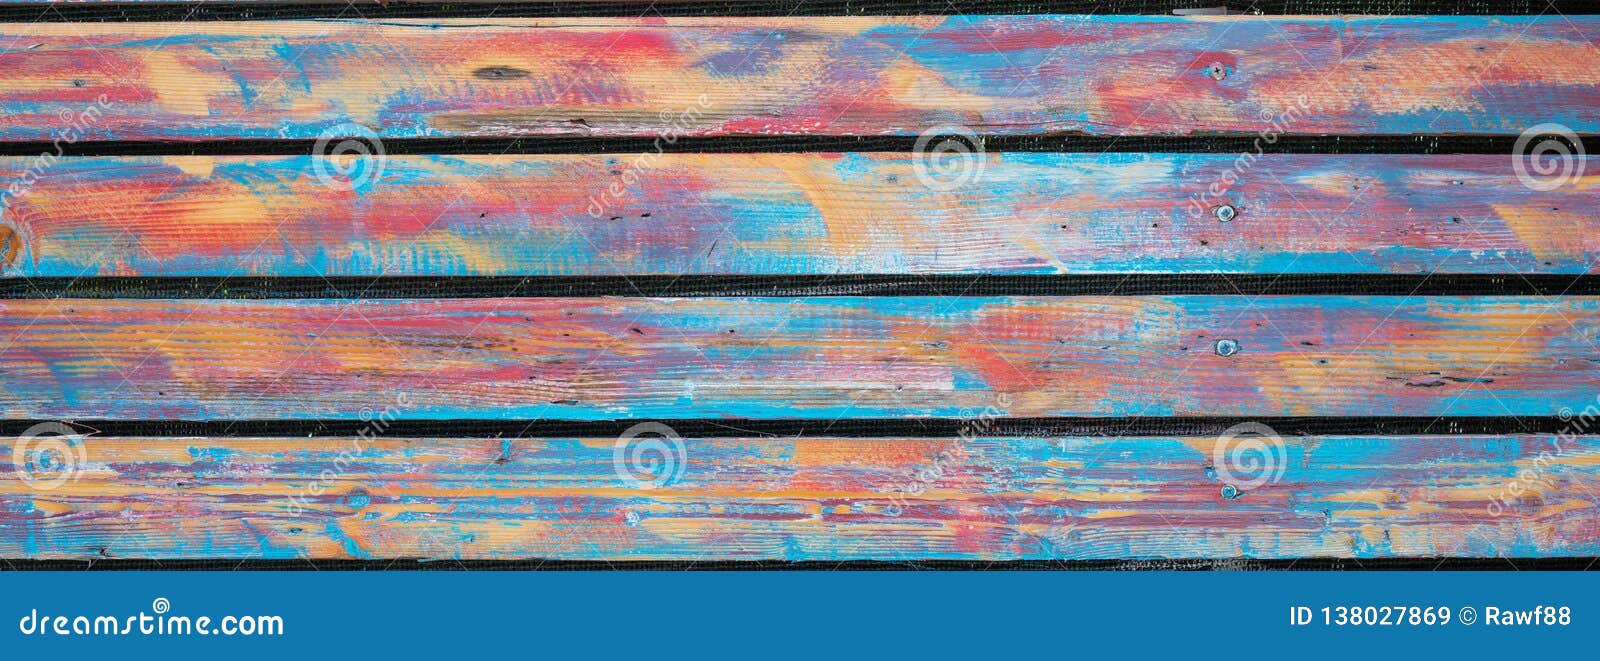 wooden planks, colorful painted, with nails, floor or wall, banner